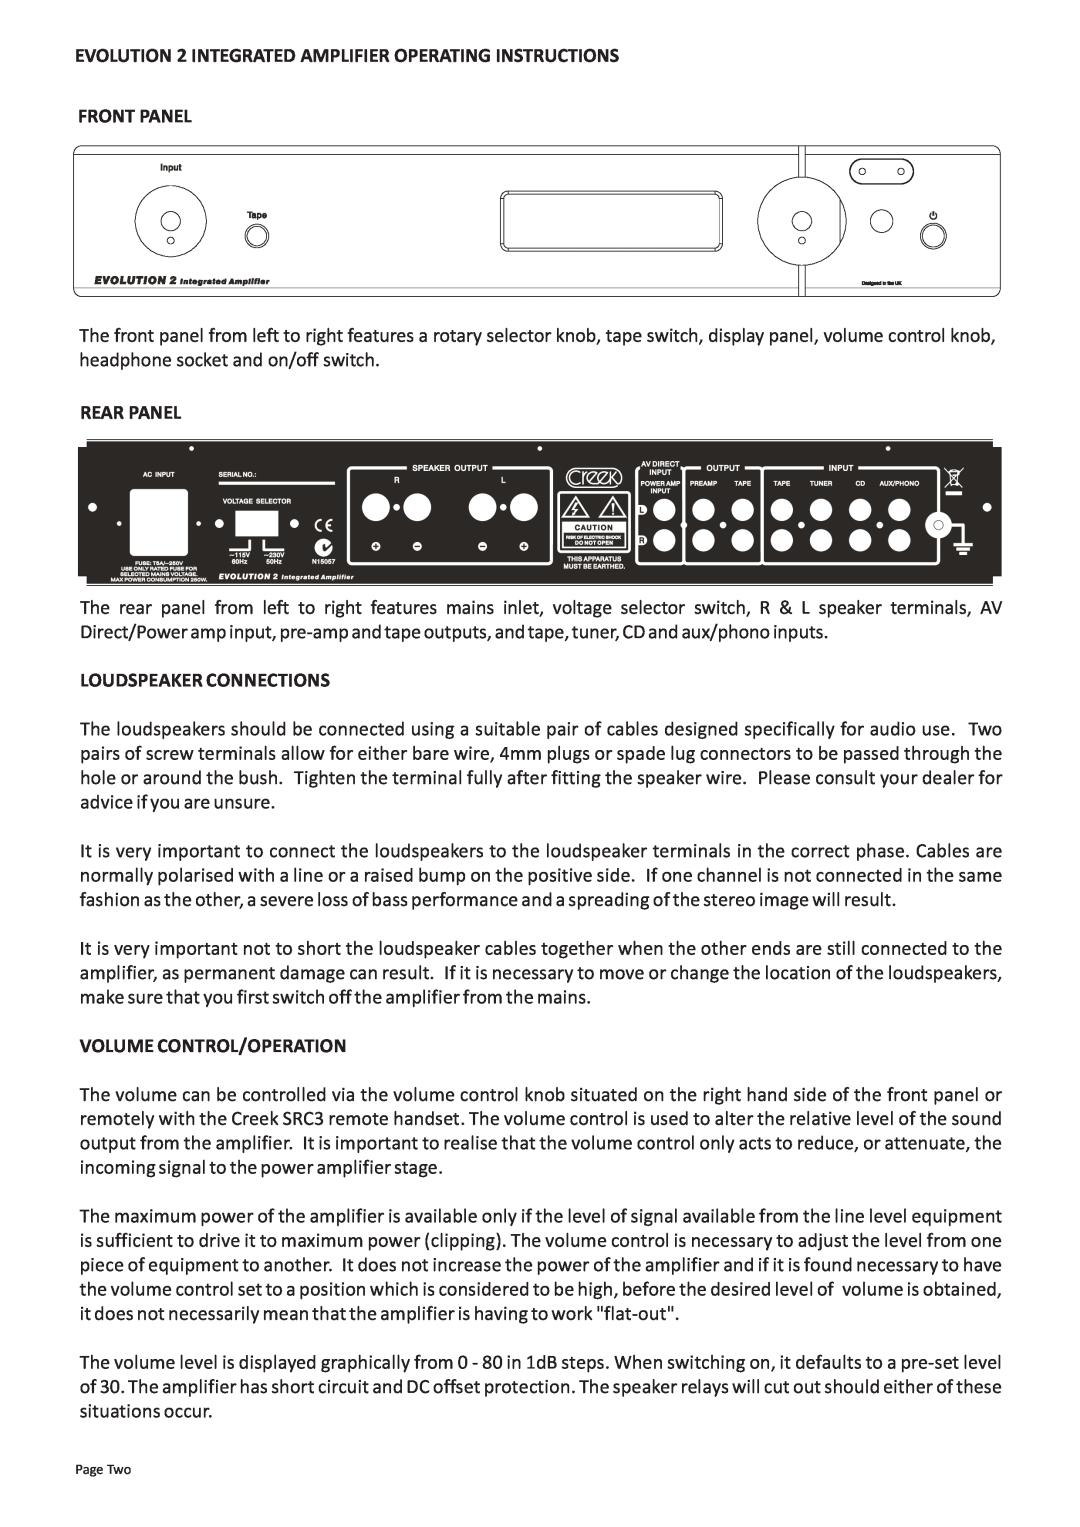 Creek Audio Evolution 2 Front Panel, Rear Panel, Loudspeaker Connections, Volume Control/Operation, Page Two 